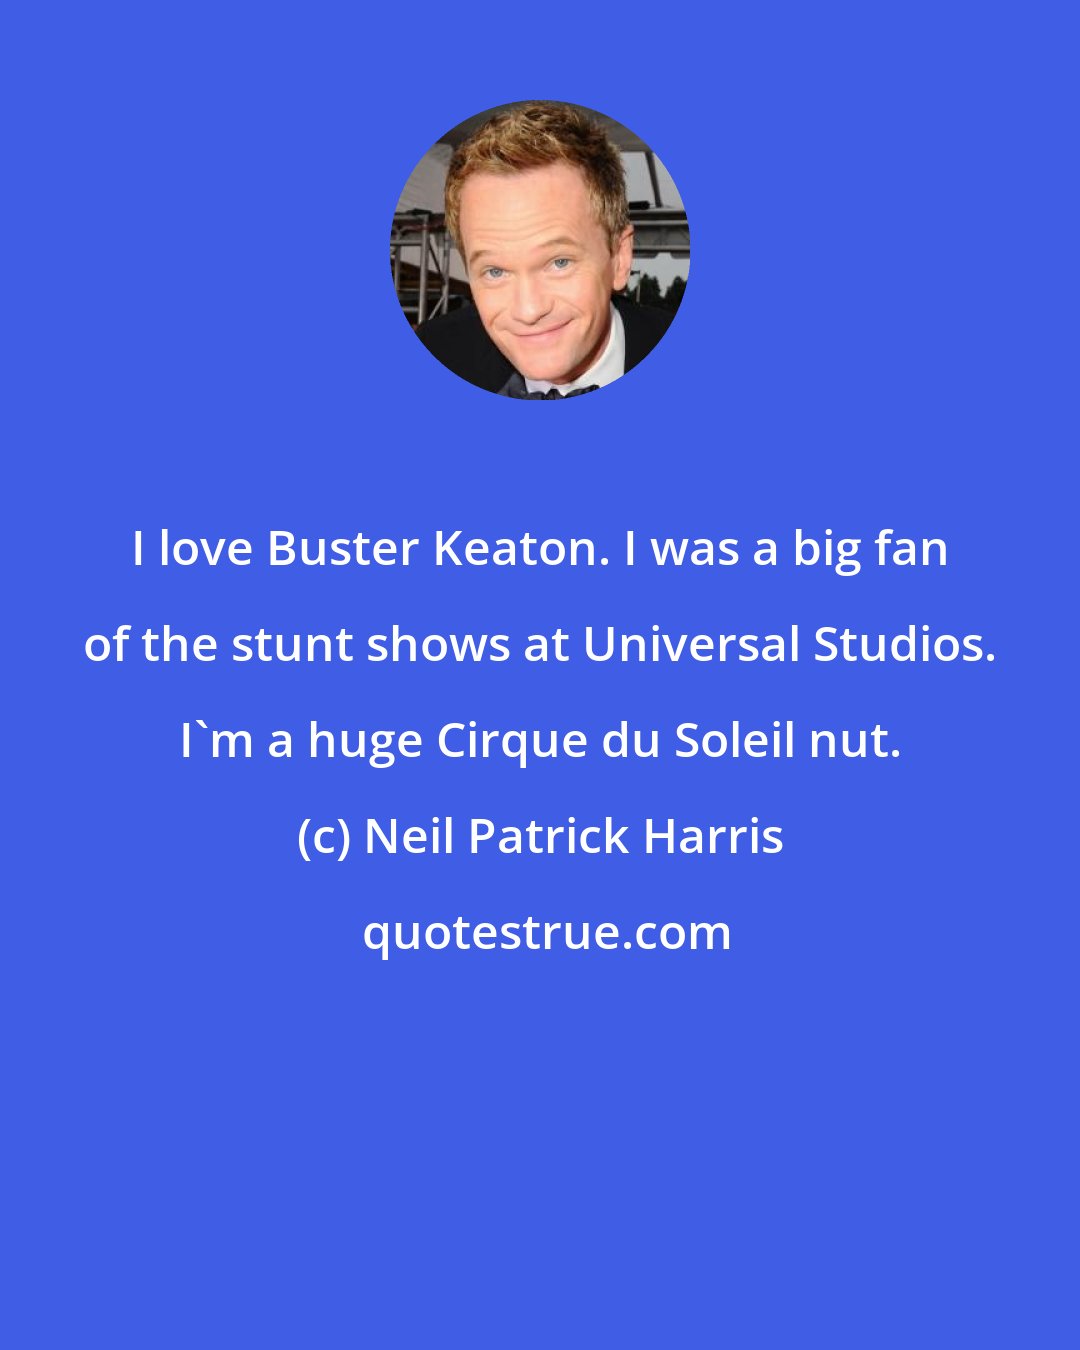 Neil Patrick Harris: I love Buster Keaton. I was a big fan of the stunt shows at Universal Studios. I'm a huge Cirque du Soleil nut.